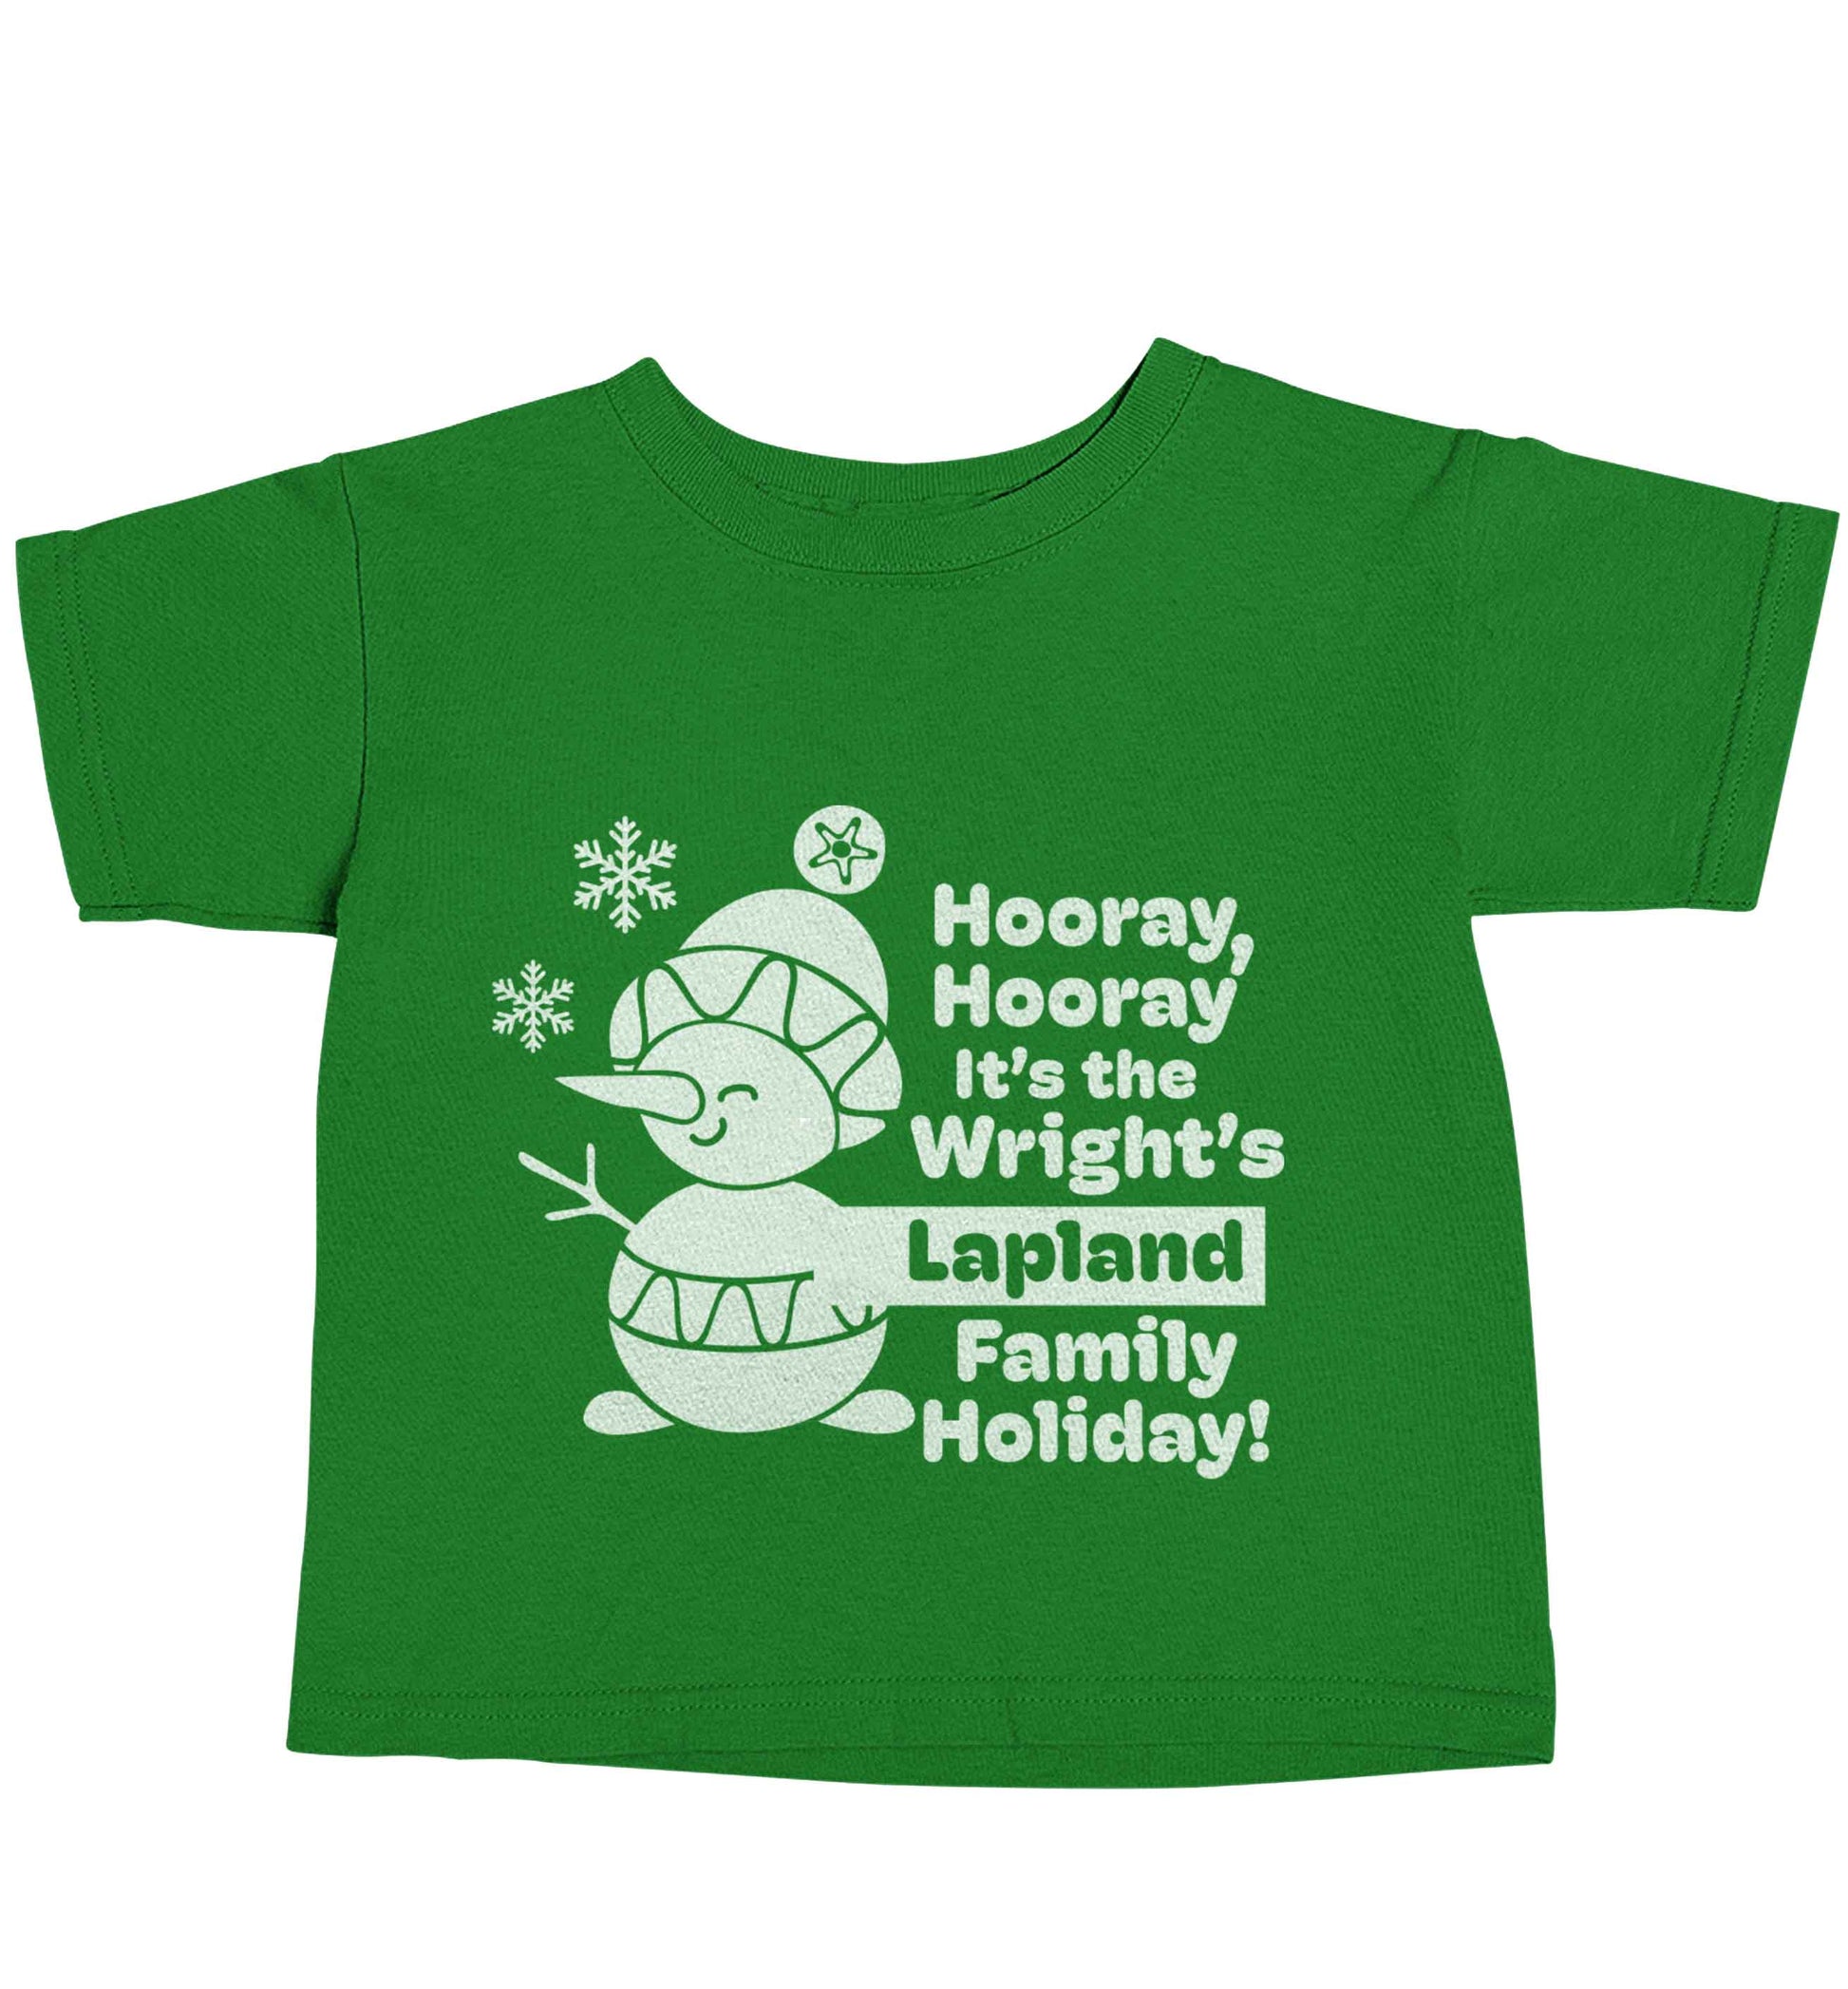 Hooray it's the personalised Lapland holiday! green baby toddler Tshirt 2 Years